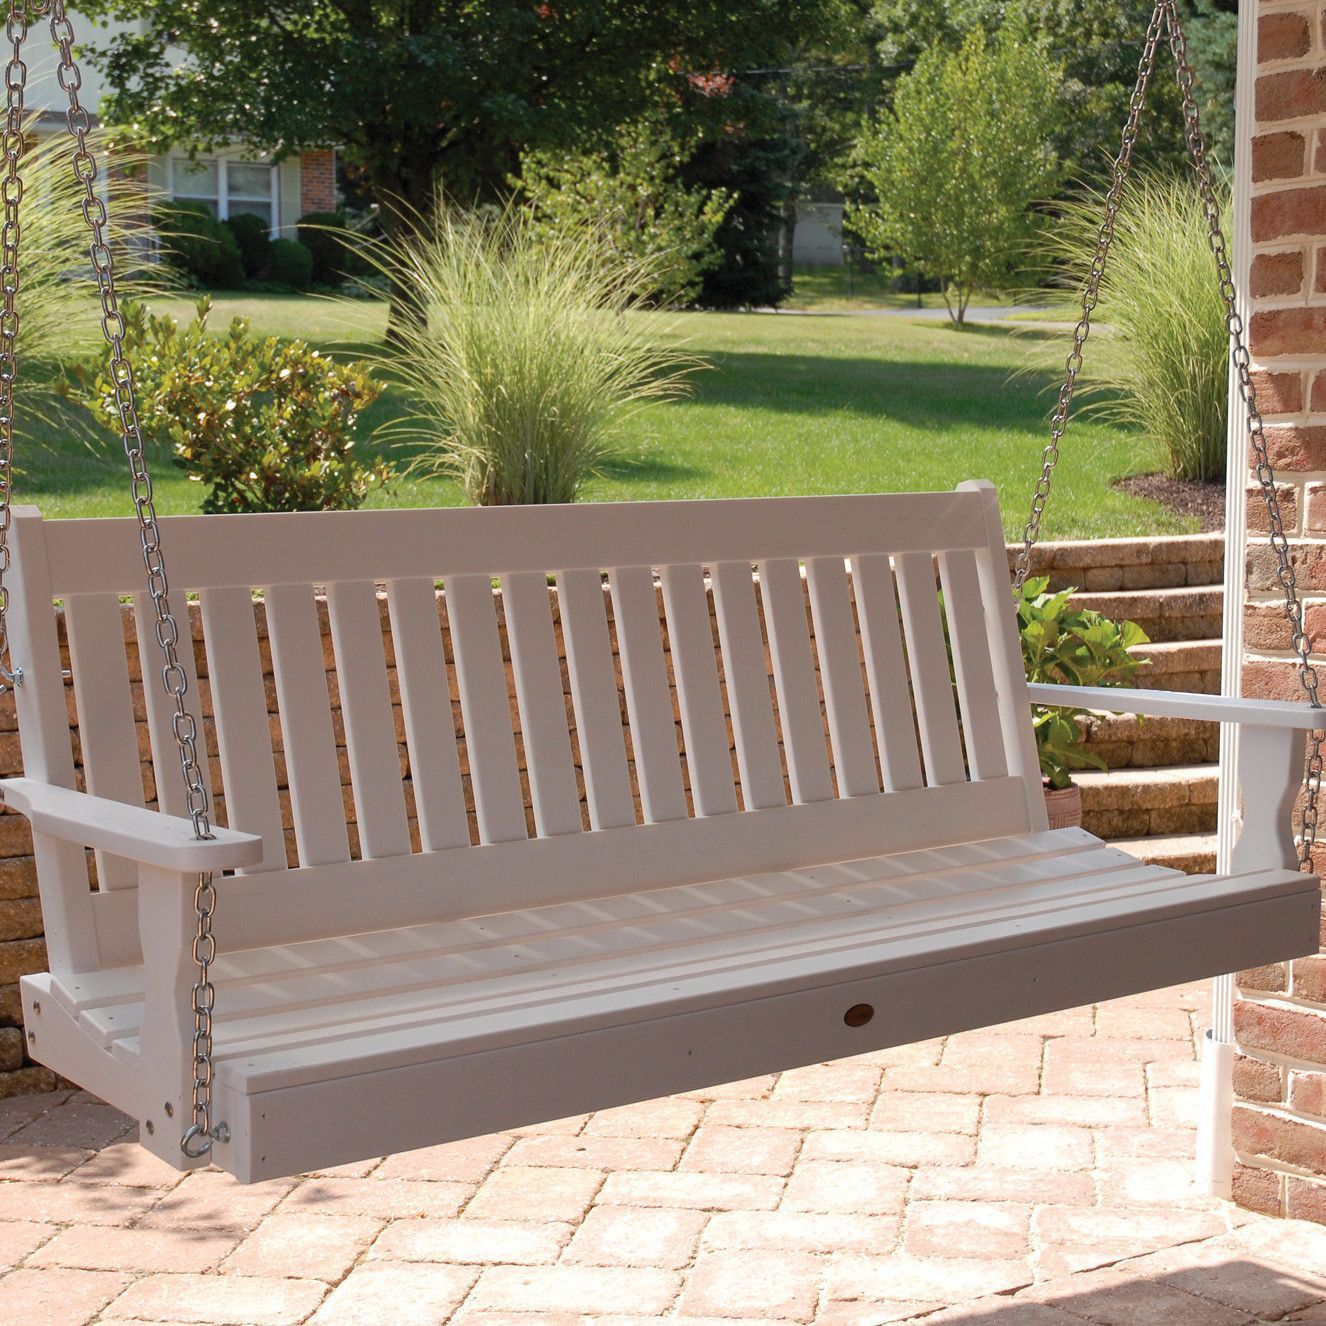 Amelia Porch Swing | Products | Porch Swing, Porch, Outdoor Within Contoured Classic Porch Swings (View 8 of 25)